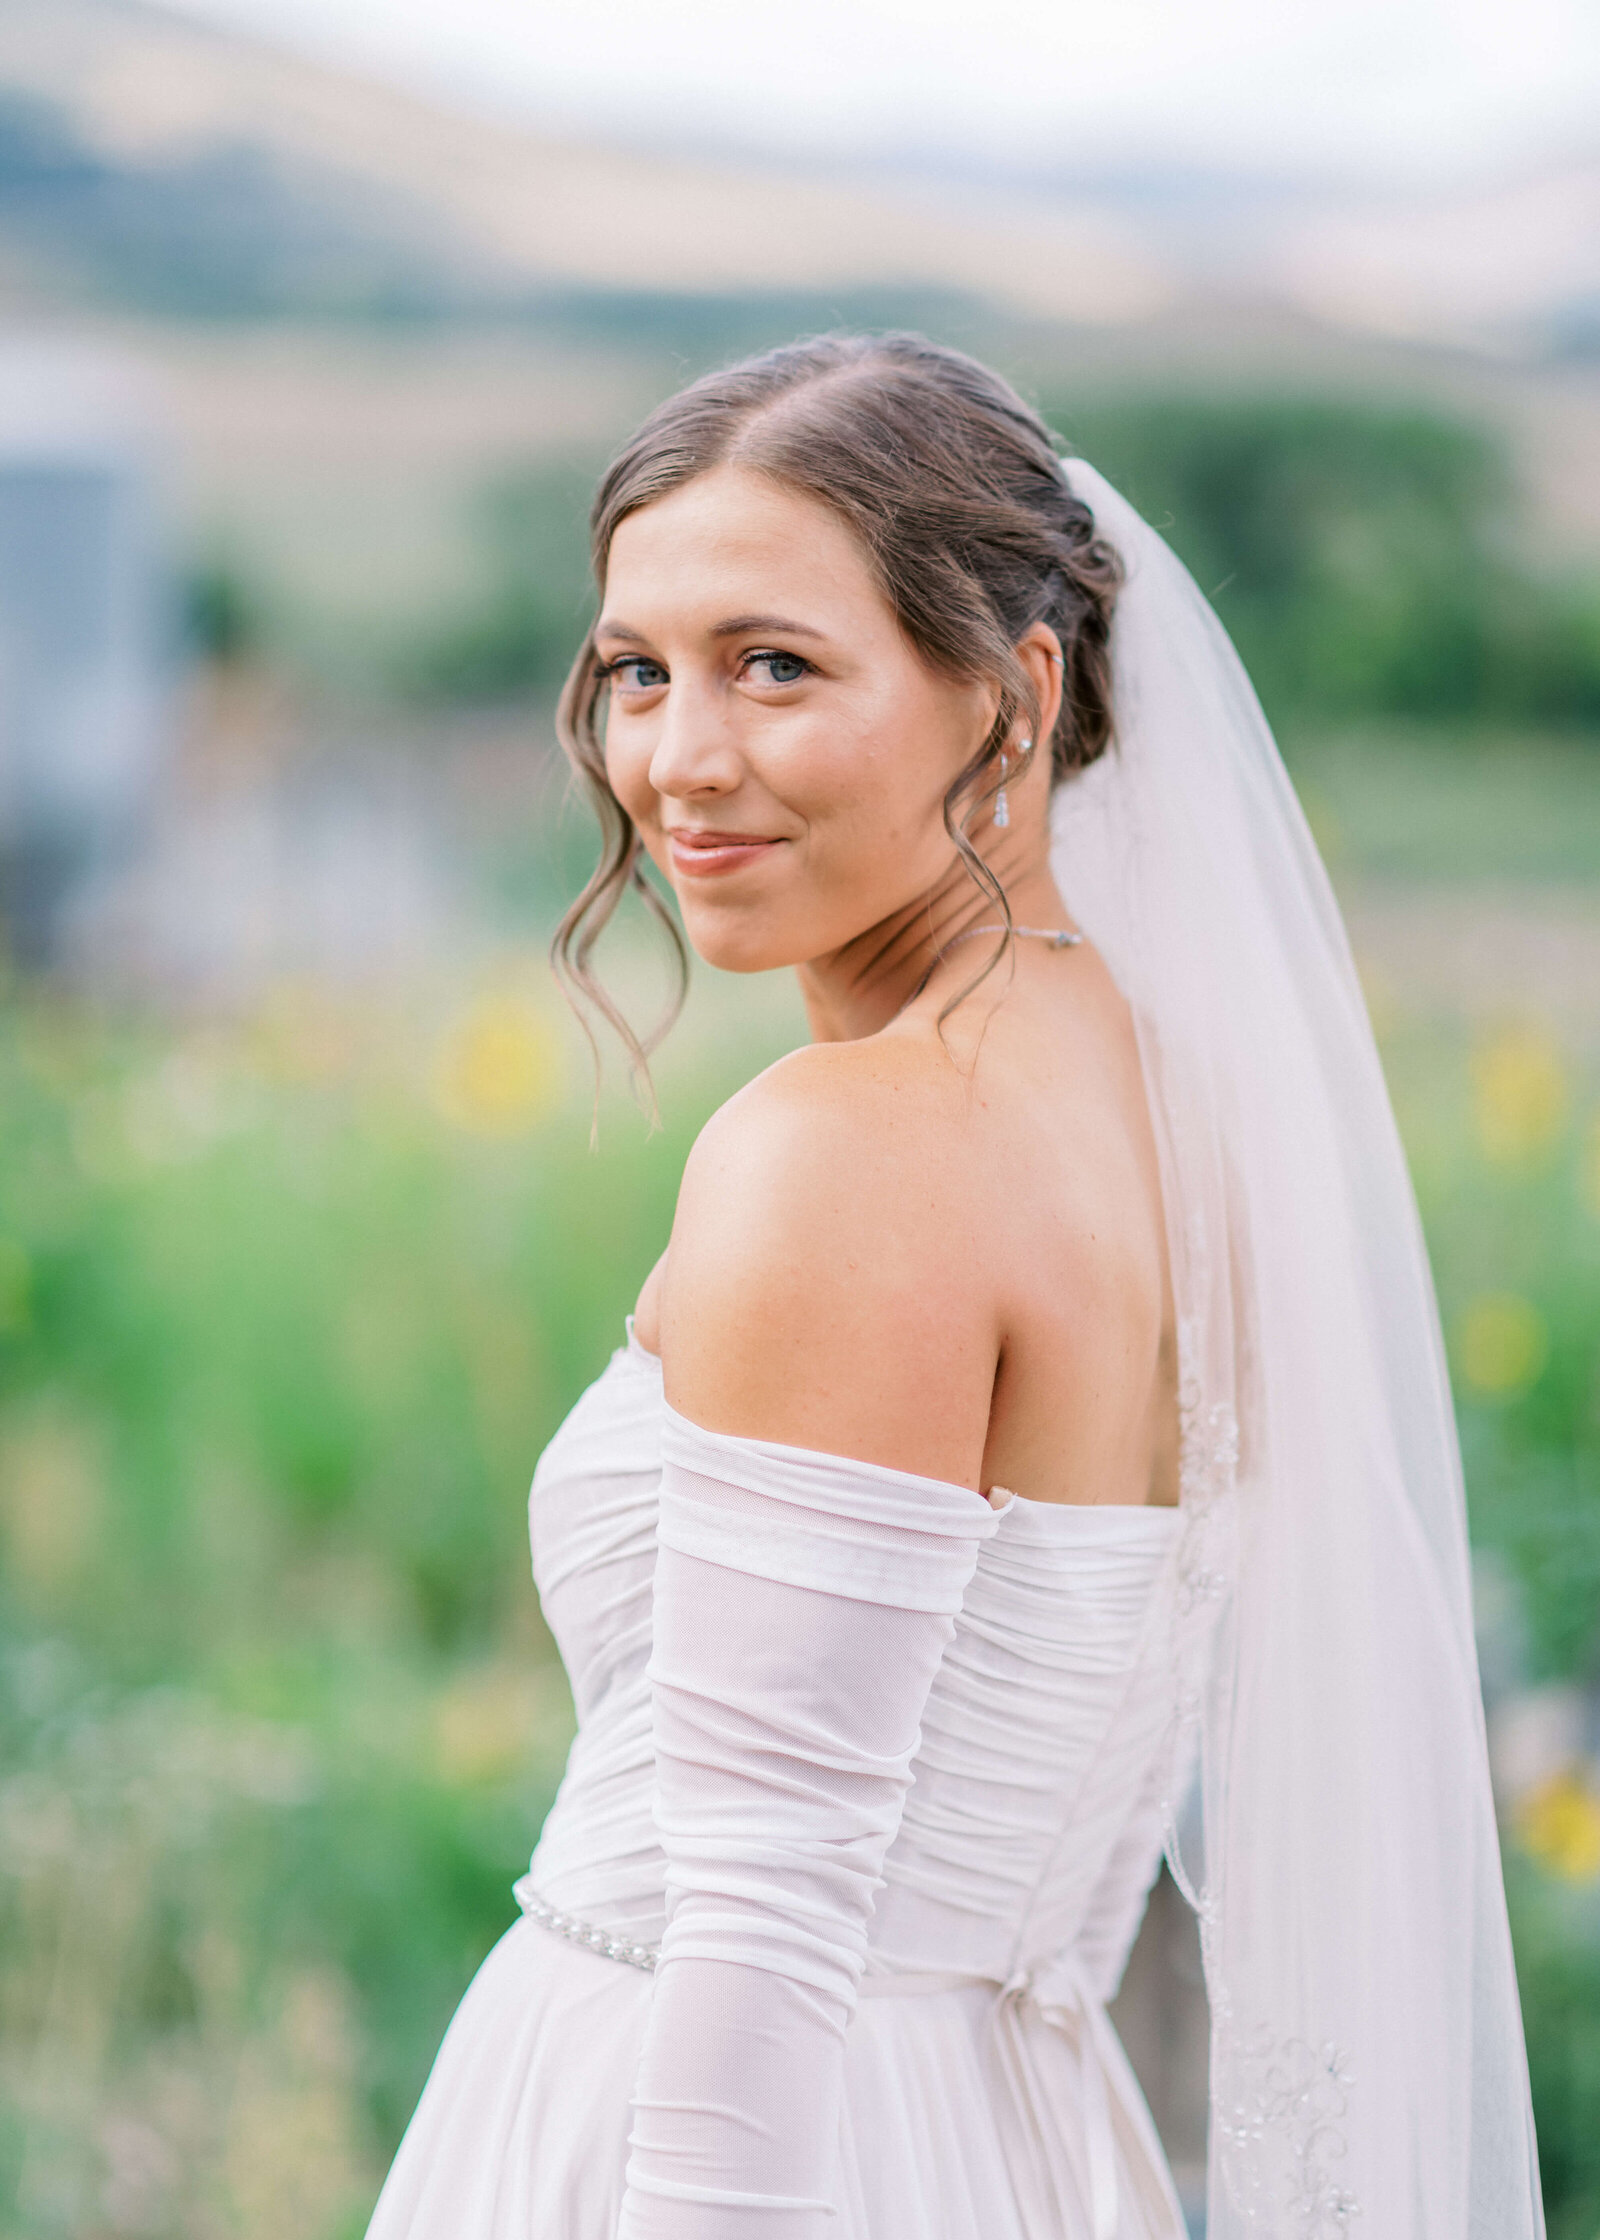 Beautiful bride looks over her shoulder while standing in a green field filed with wildflowers. Image by virginia wedding photographer Erin Winter